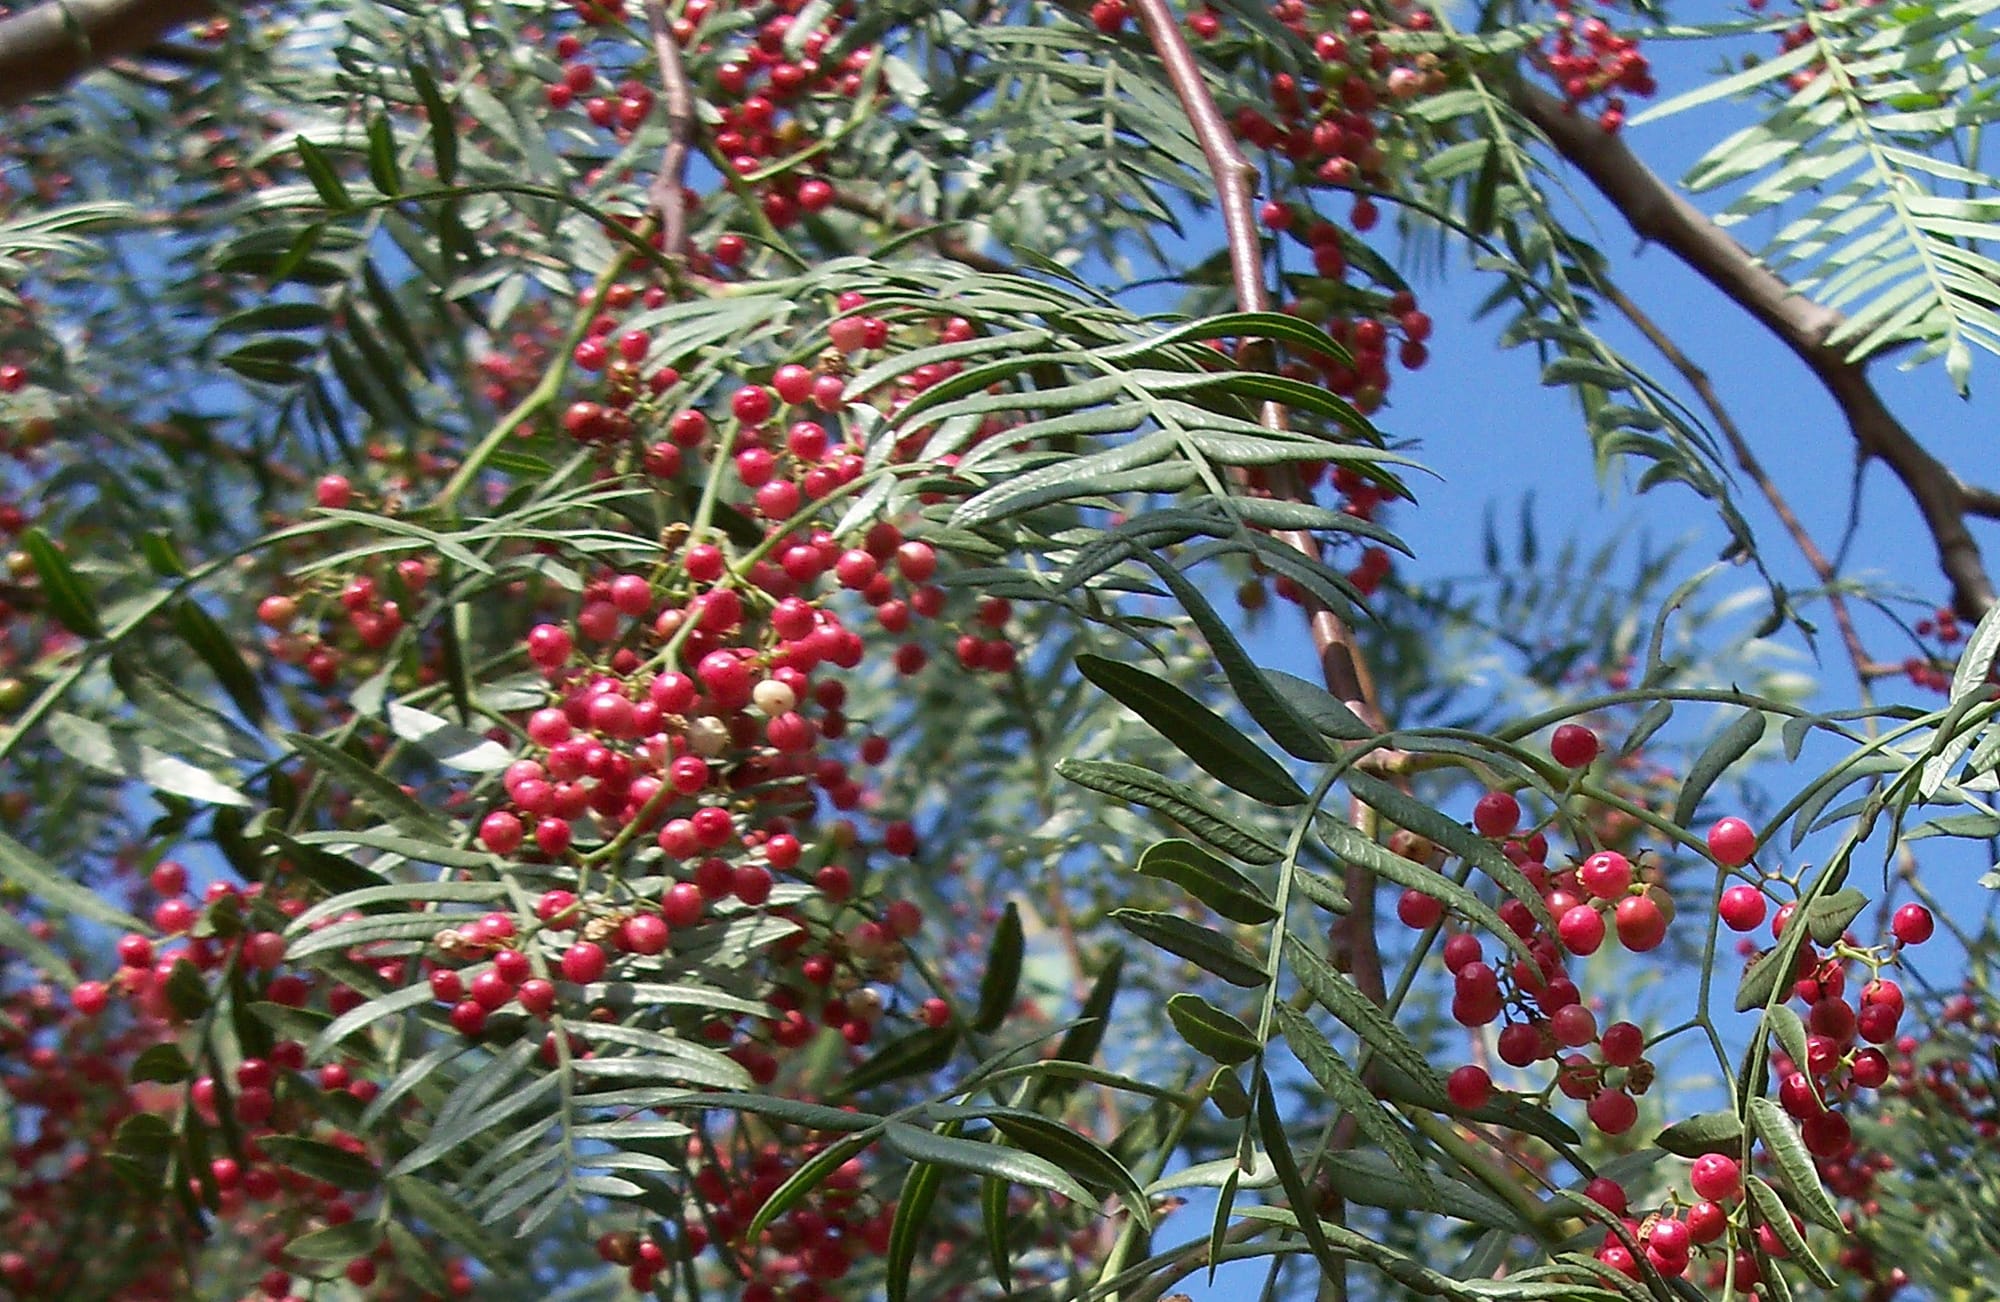 A closeup of Schinus molle L. (colloq., California Pepper Tree) with long green leaves and bright red berries against a brilliant blue sky